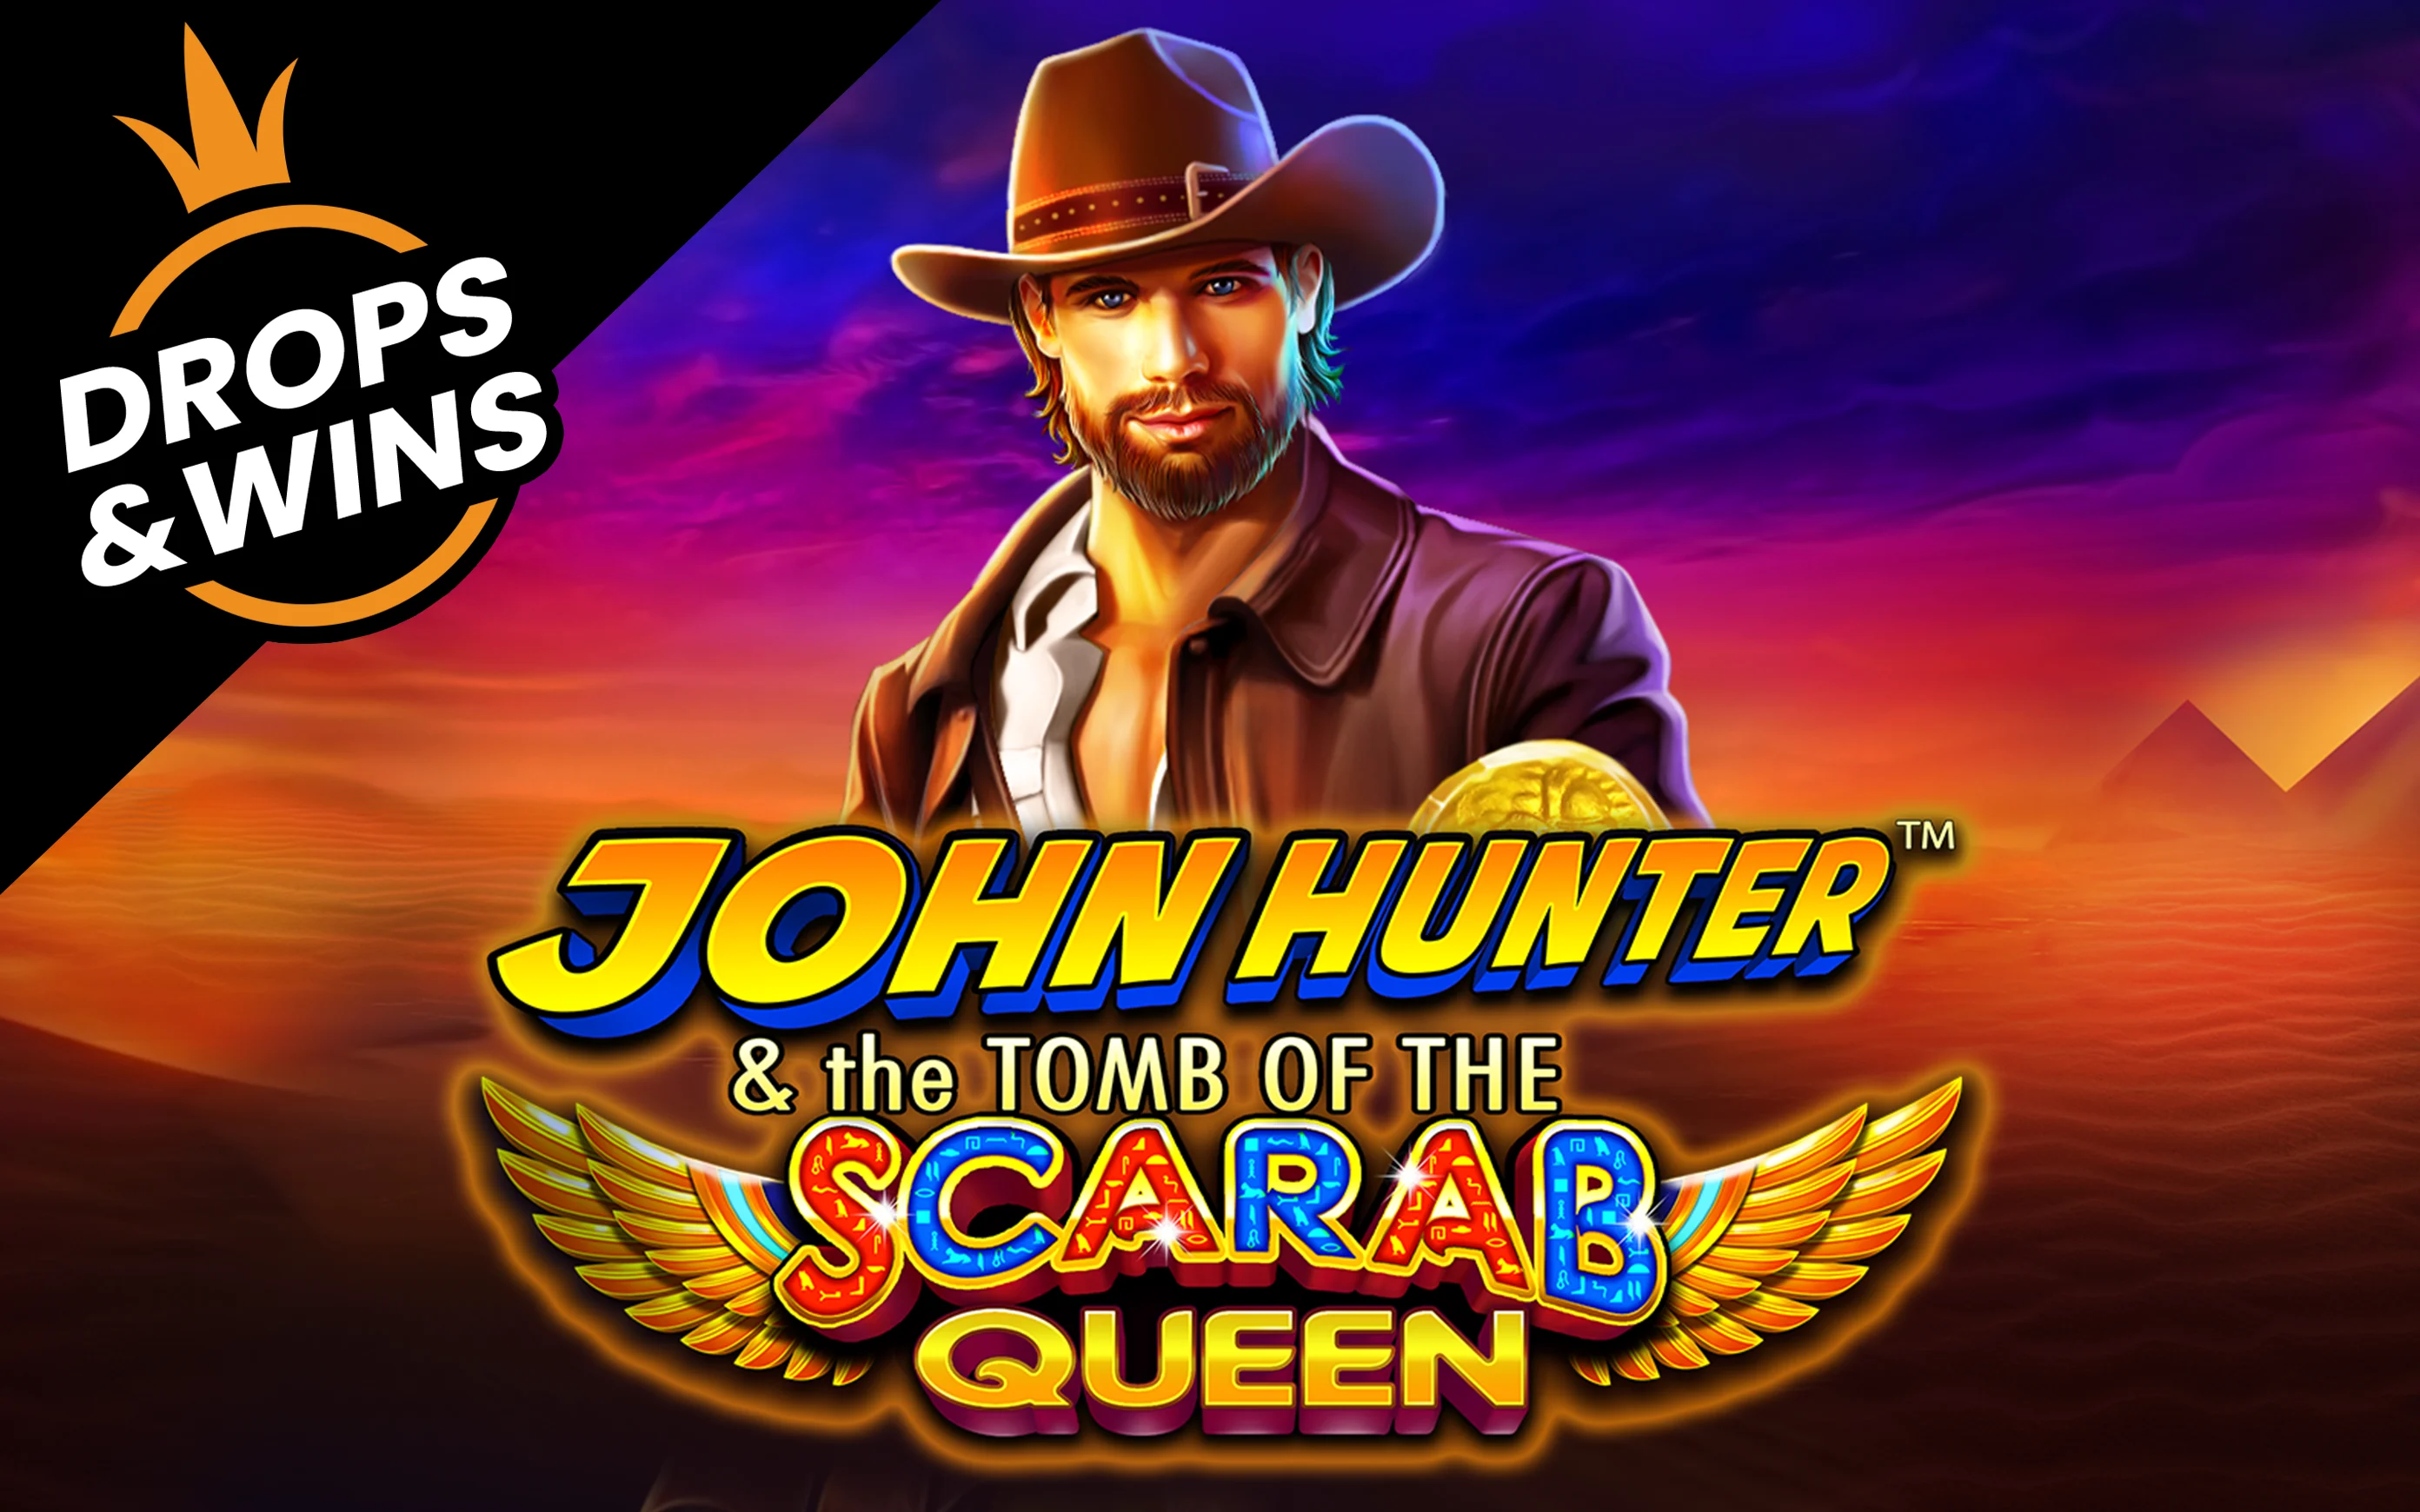 Jouer à John Hunter and the Tomb of the Scarab Queen™ sur le casino en ligne Starcasino.be